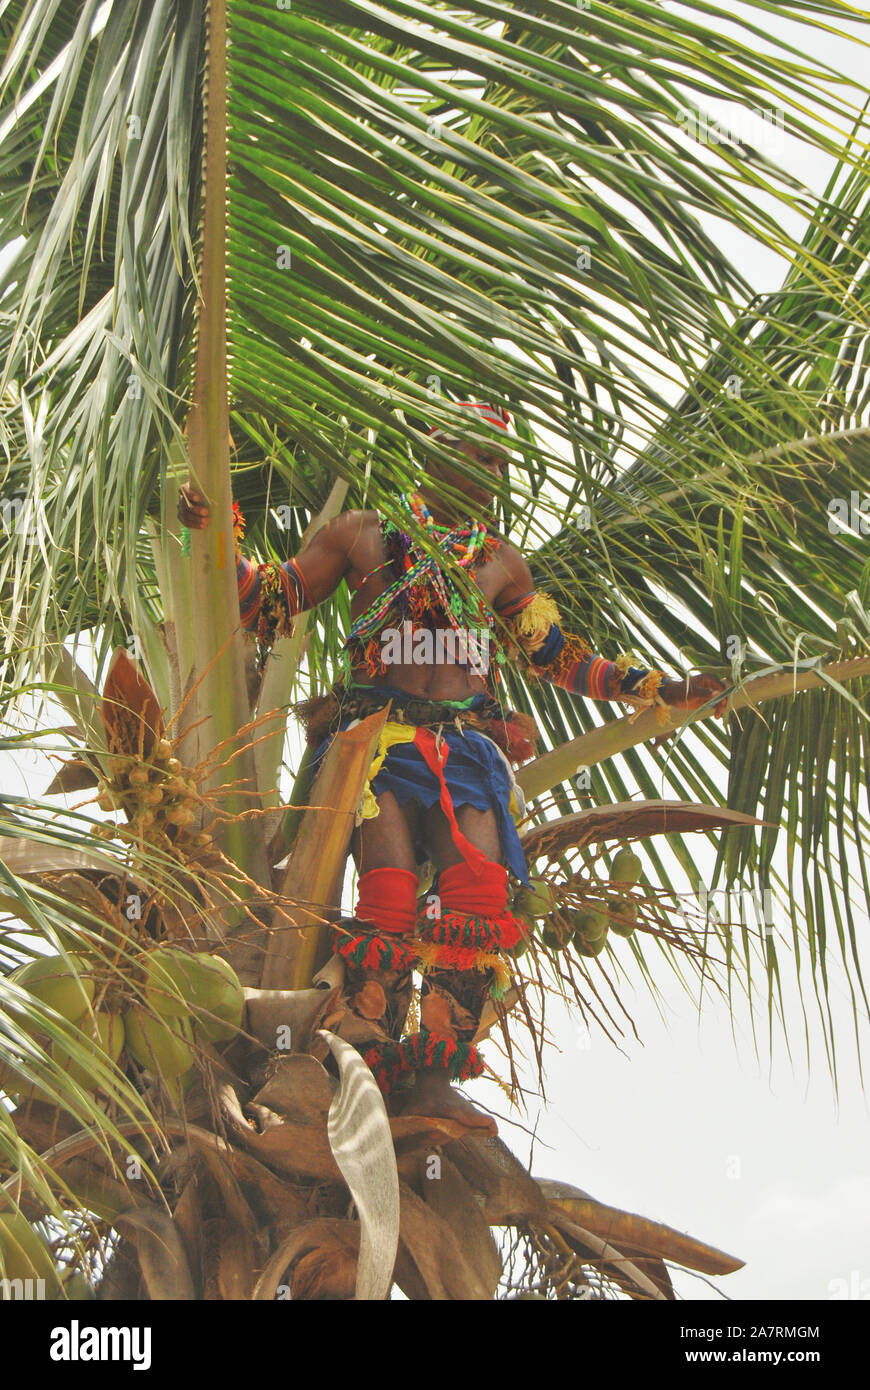 A young man dancing on top of a coconut tree during the Annual Black Heritage Festival, Badagry Lagos, Nigeria. Stock Photo